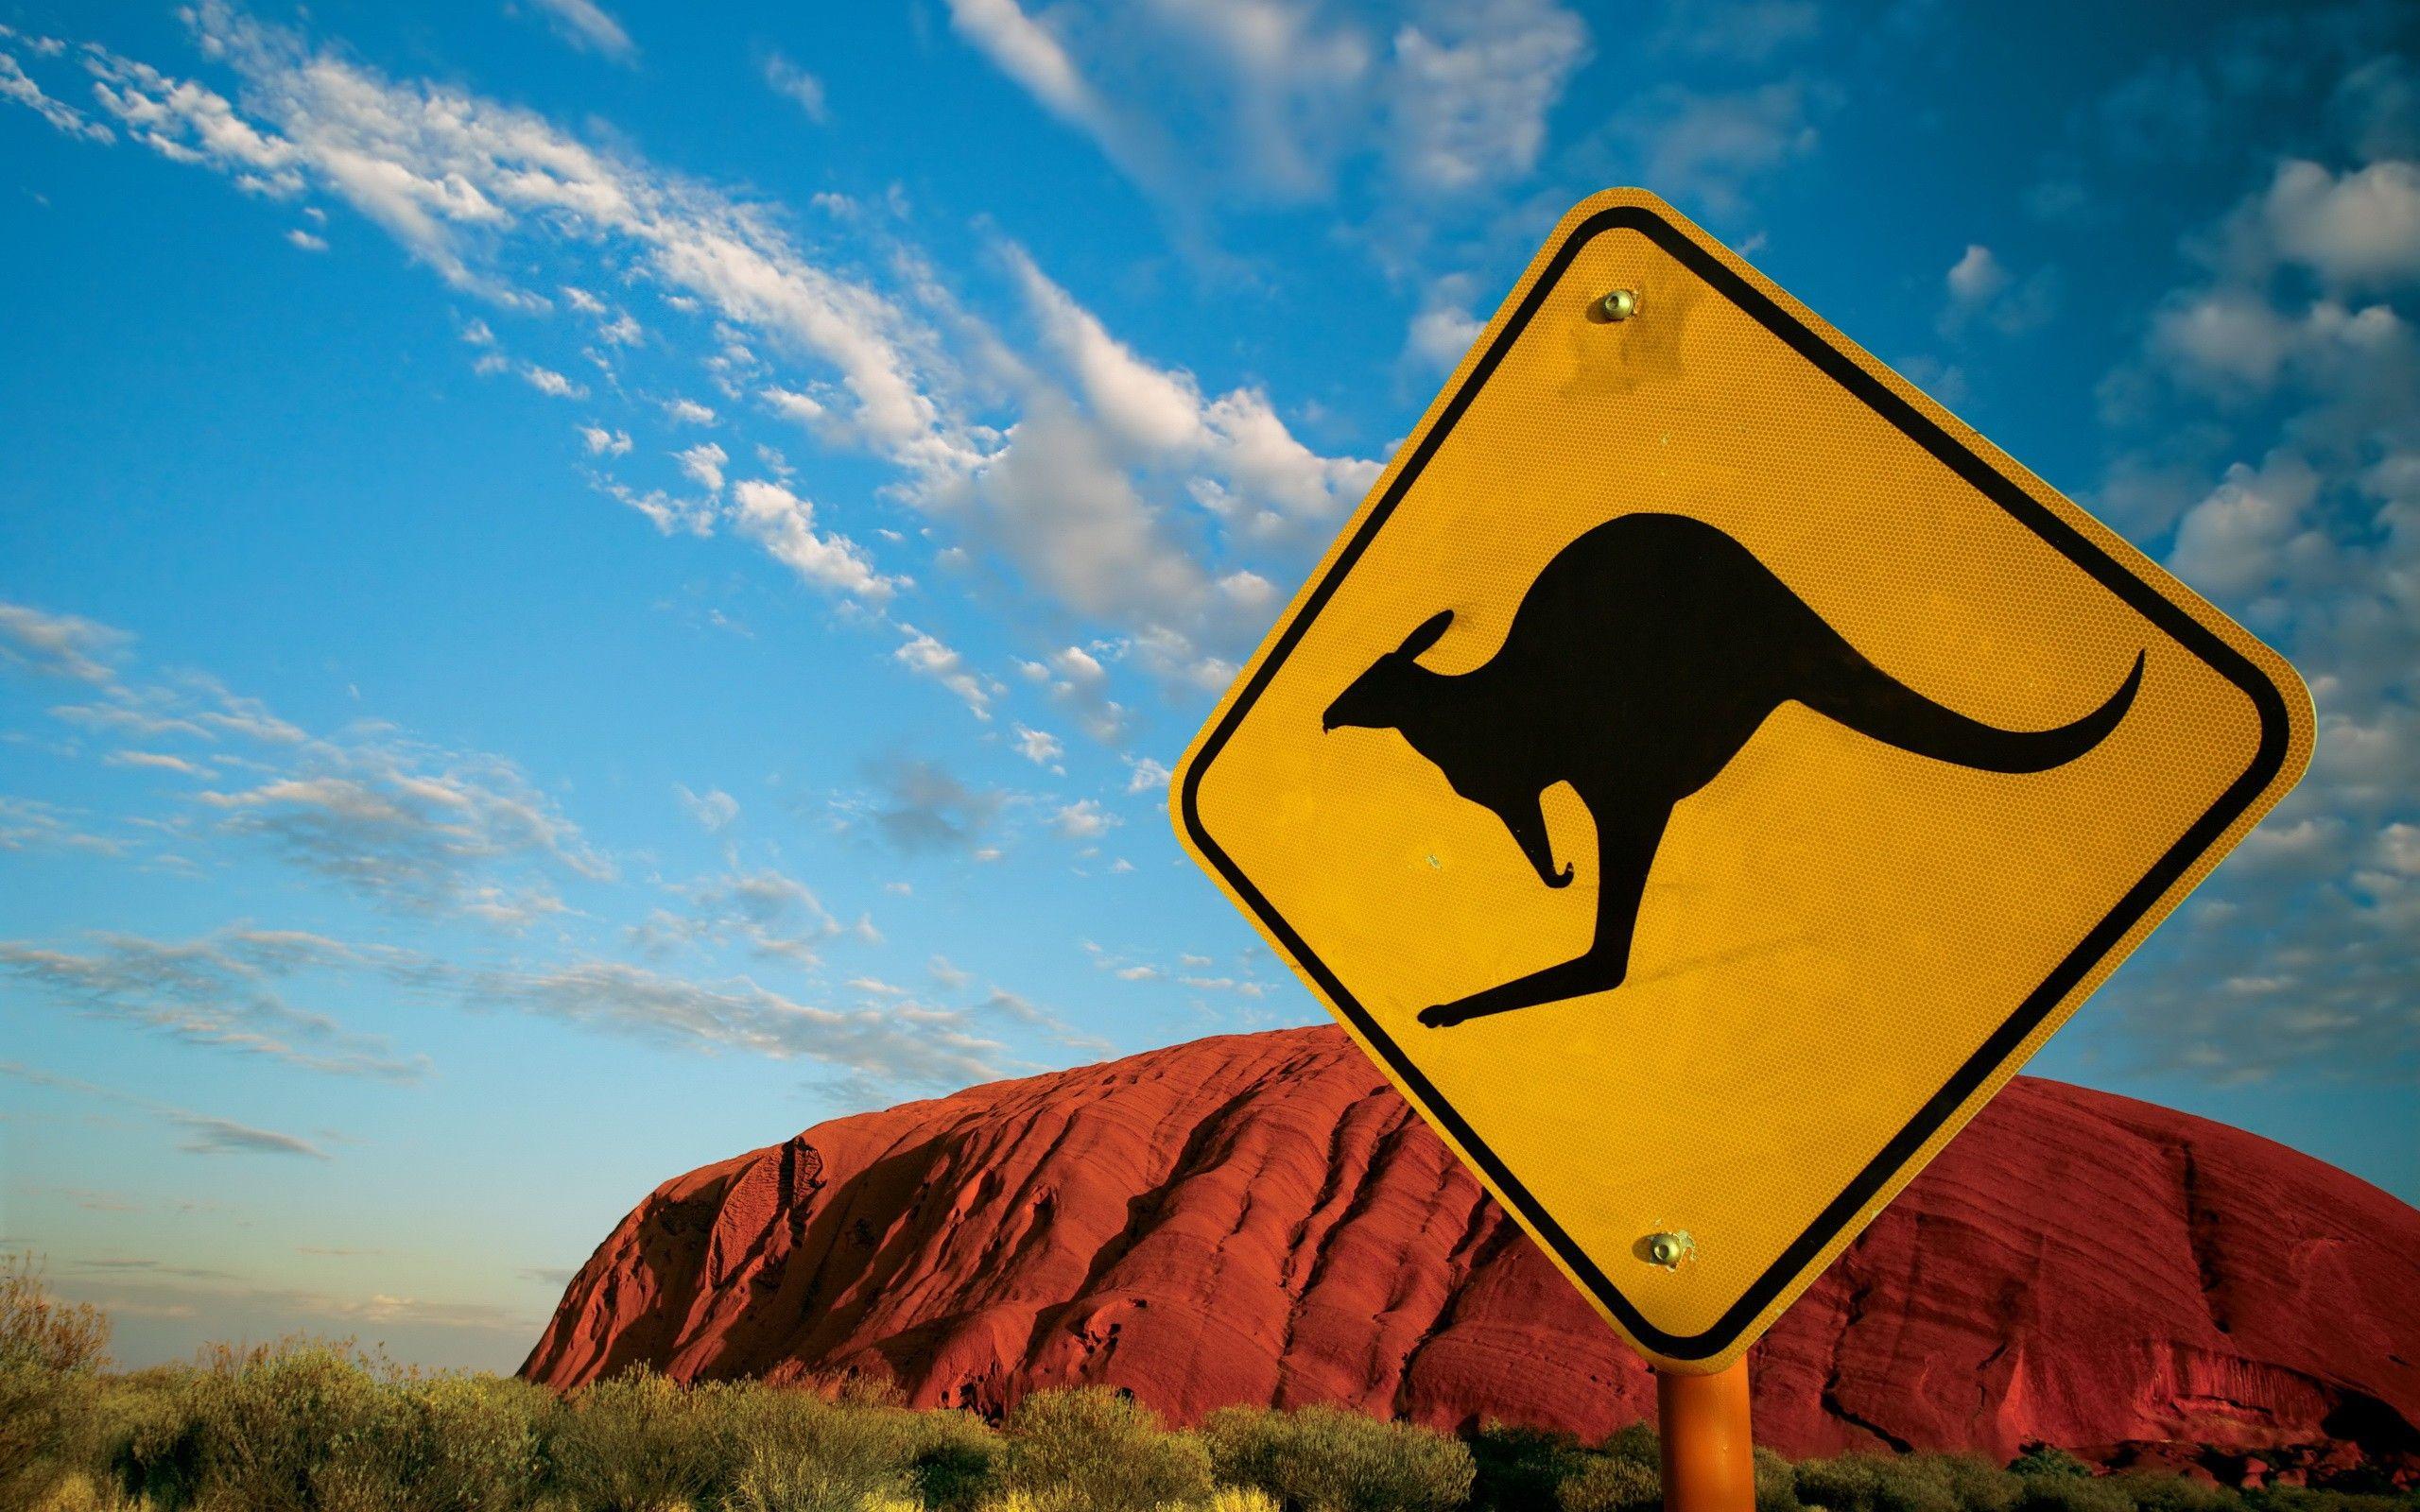 Road sign Australia wallpaper and image, picture